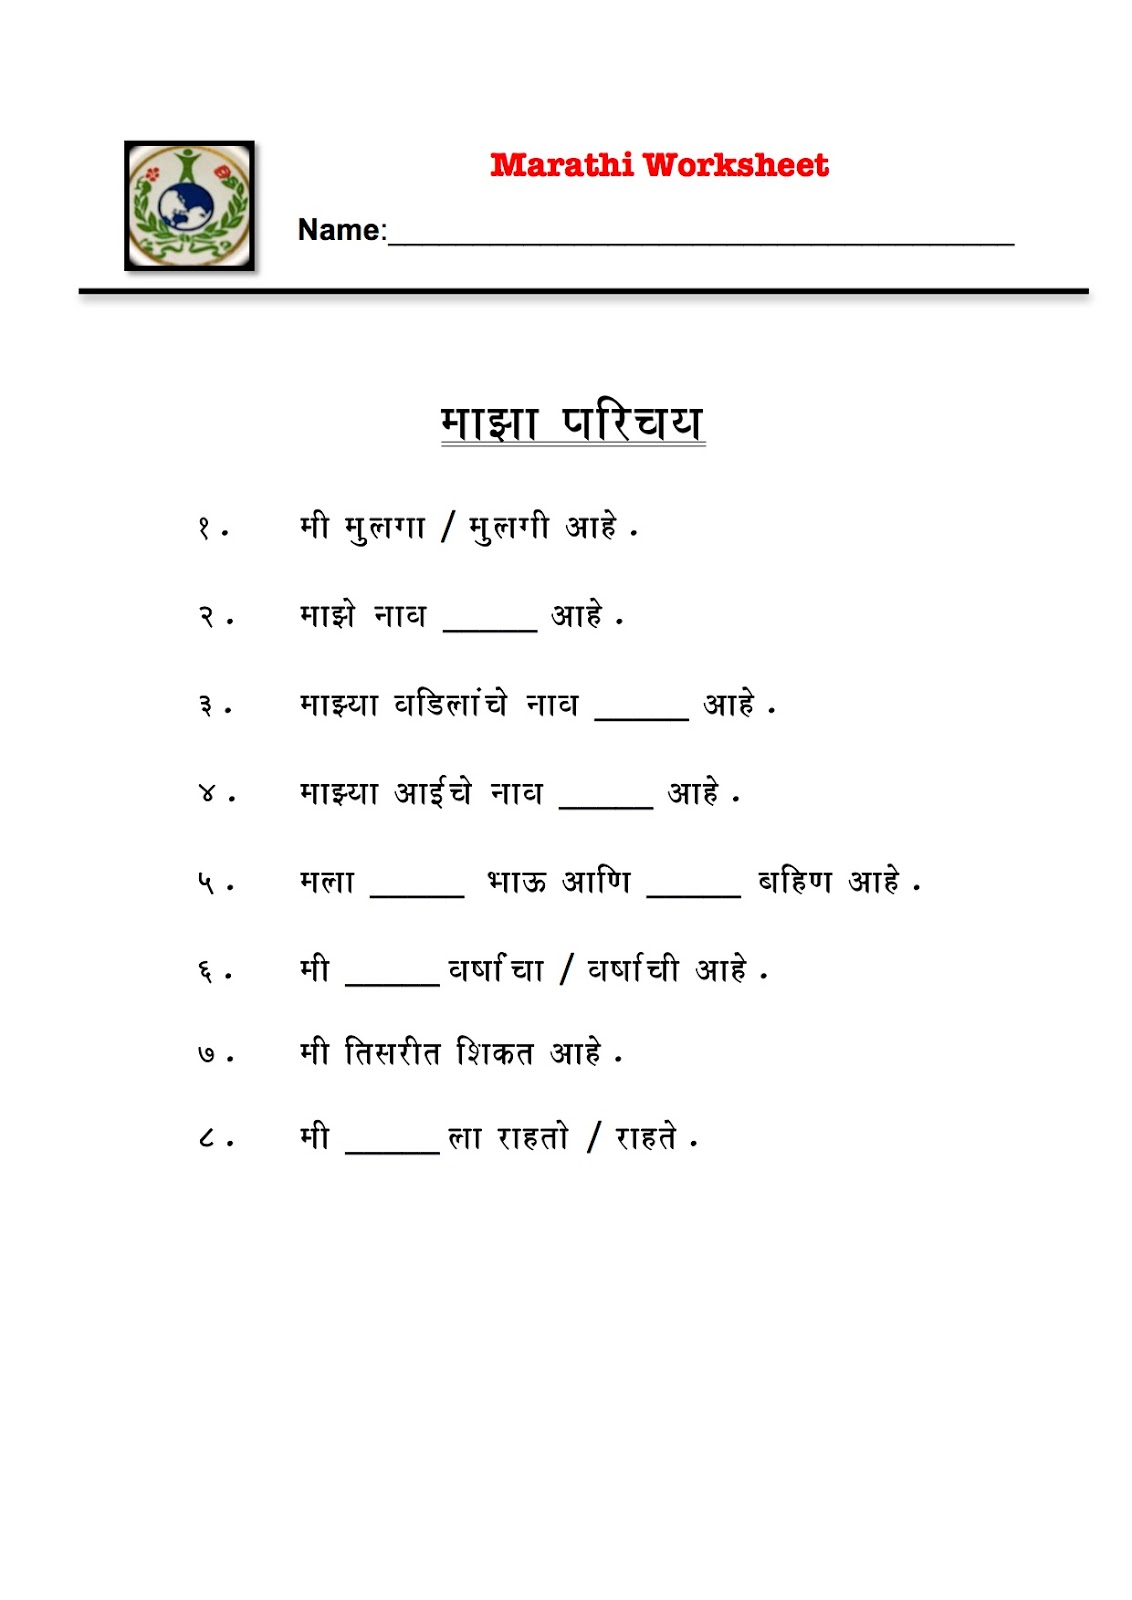 download-cbse-class-4-marathi-worksheet-2020-21-session-in-pdf